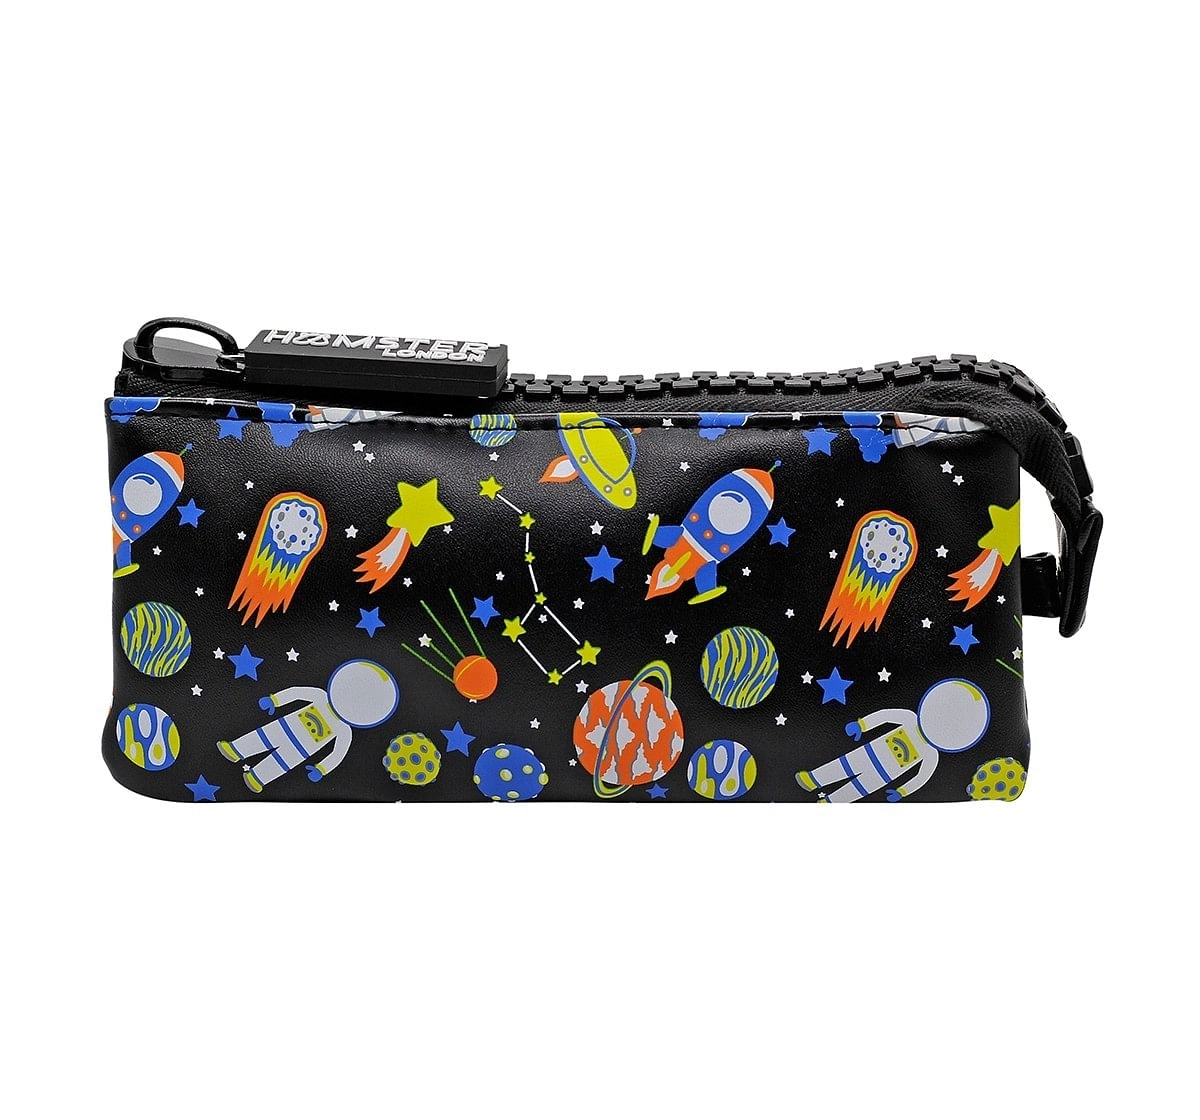 Hamster London Space Big Zipper Pouch for Kids age 3Y+ (Black)